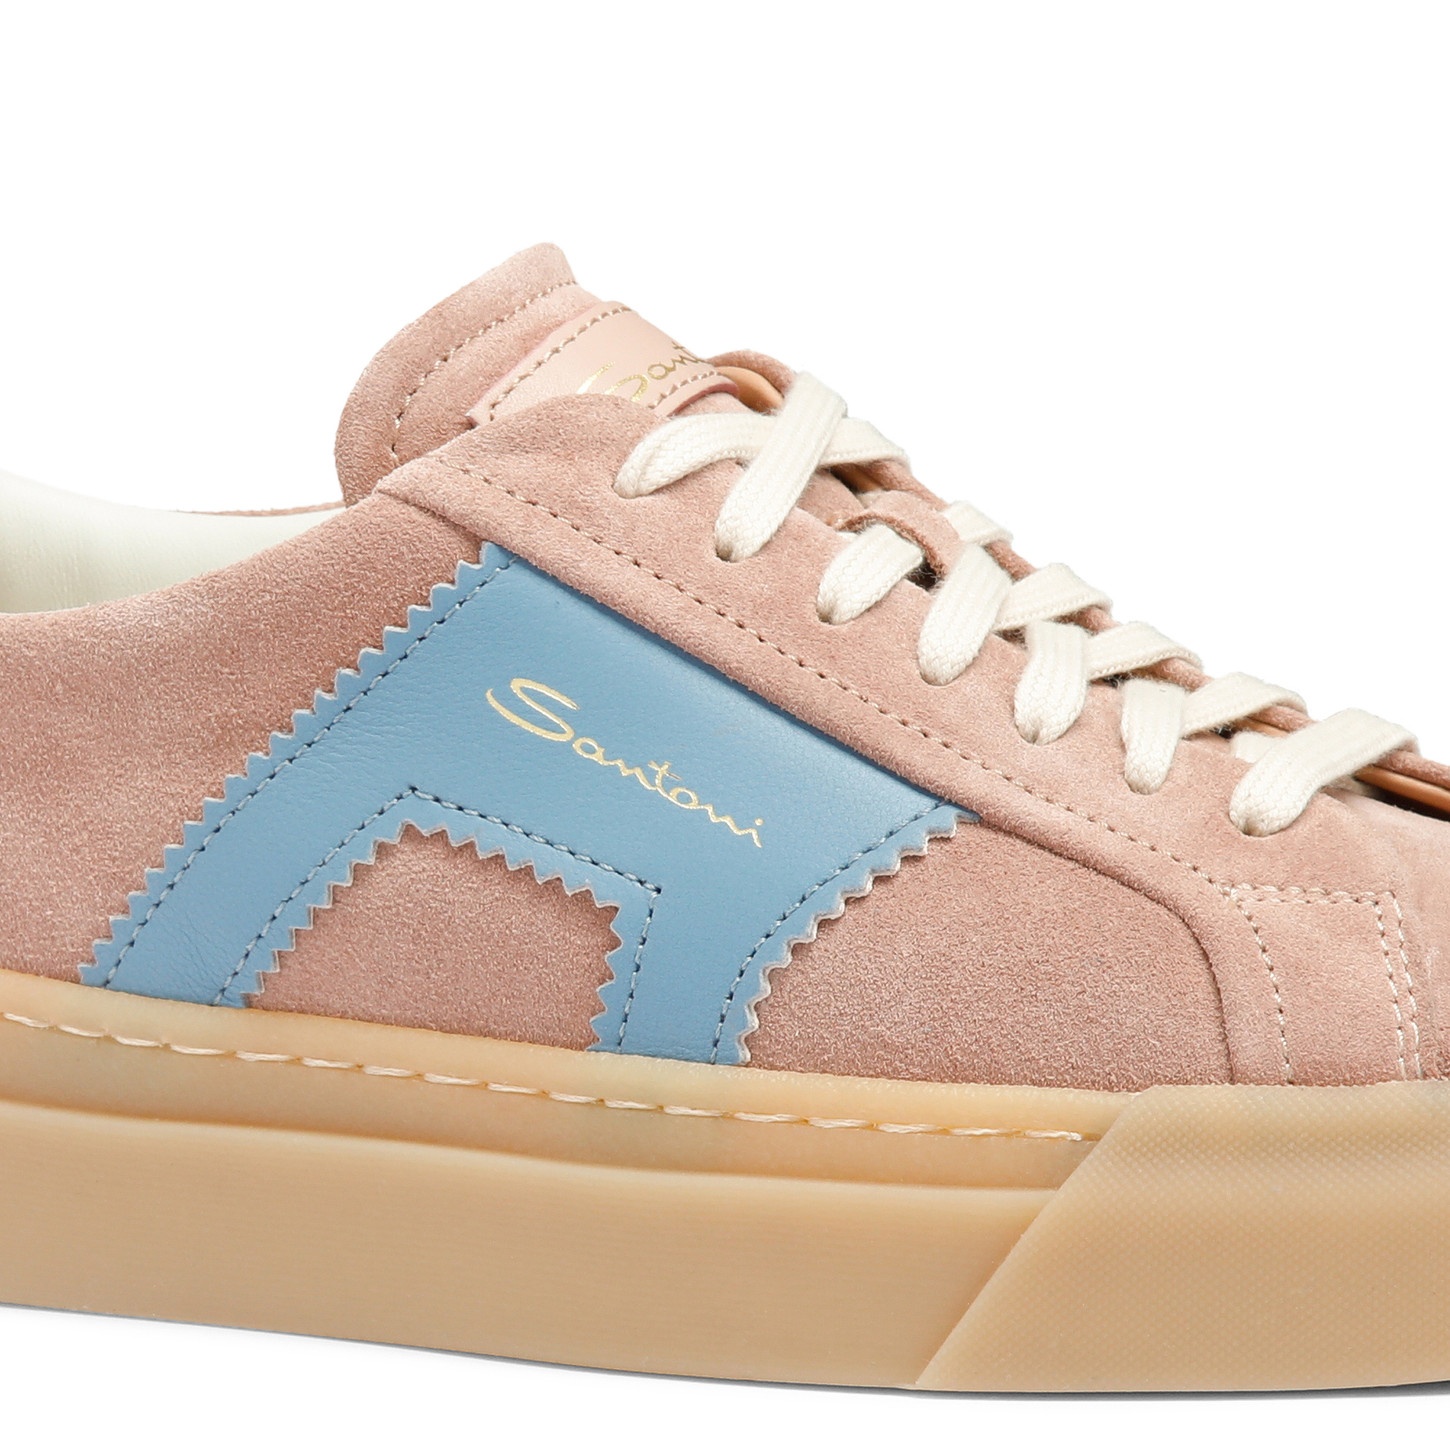 Women's pink and light blue suede and leather double buckle sneaker - 6